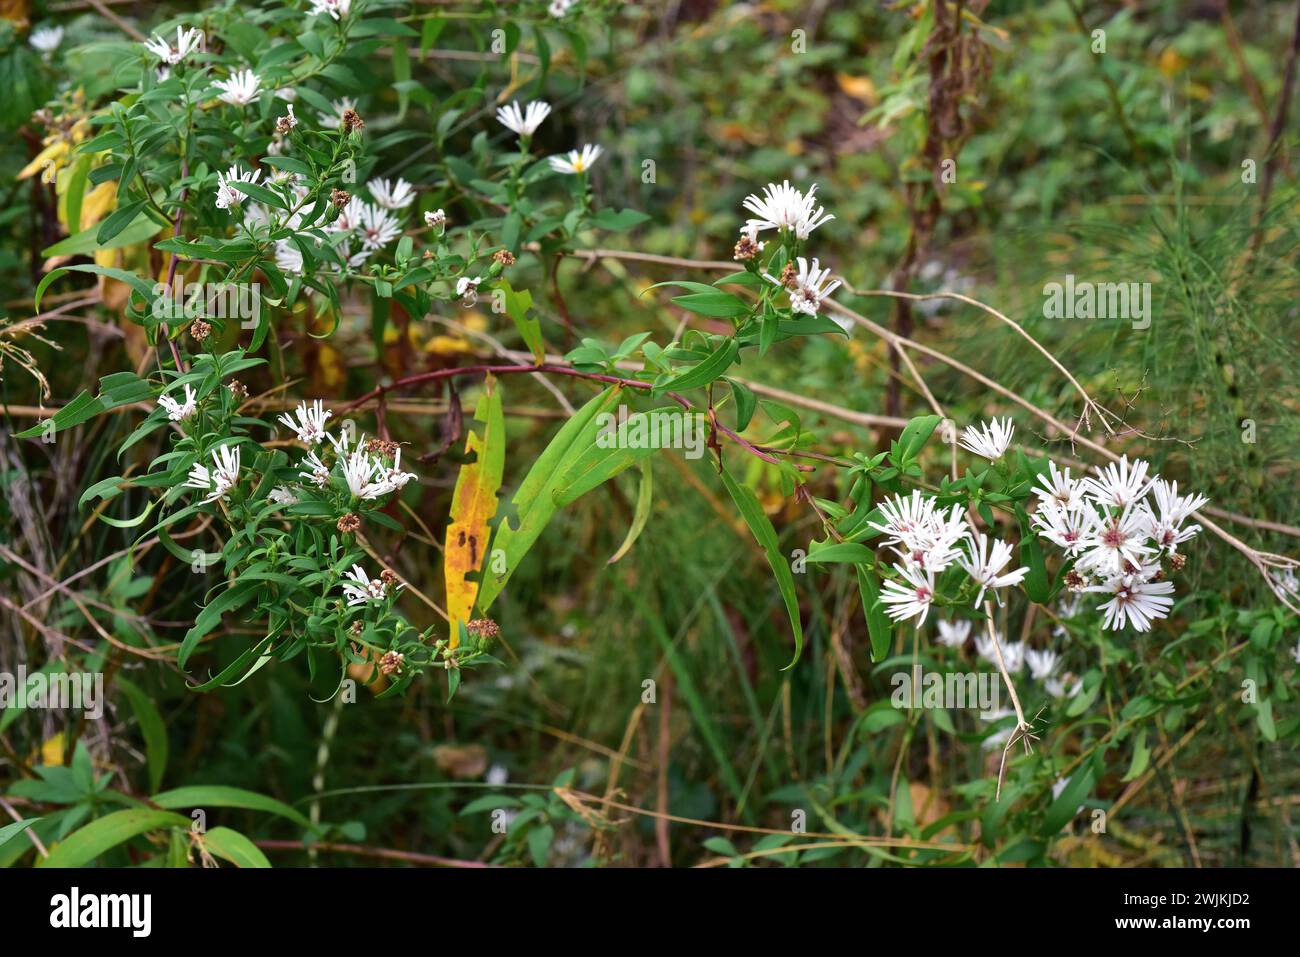 Frost aster or hairy white oldfield aster (Aster pilosus or Symphyotrichum pilosum) is an herb native to North America but naturalized in other temper Stock Photo